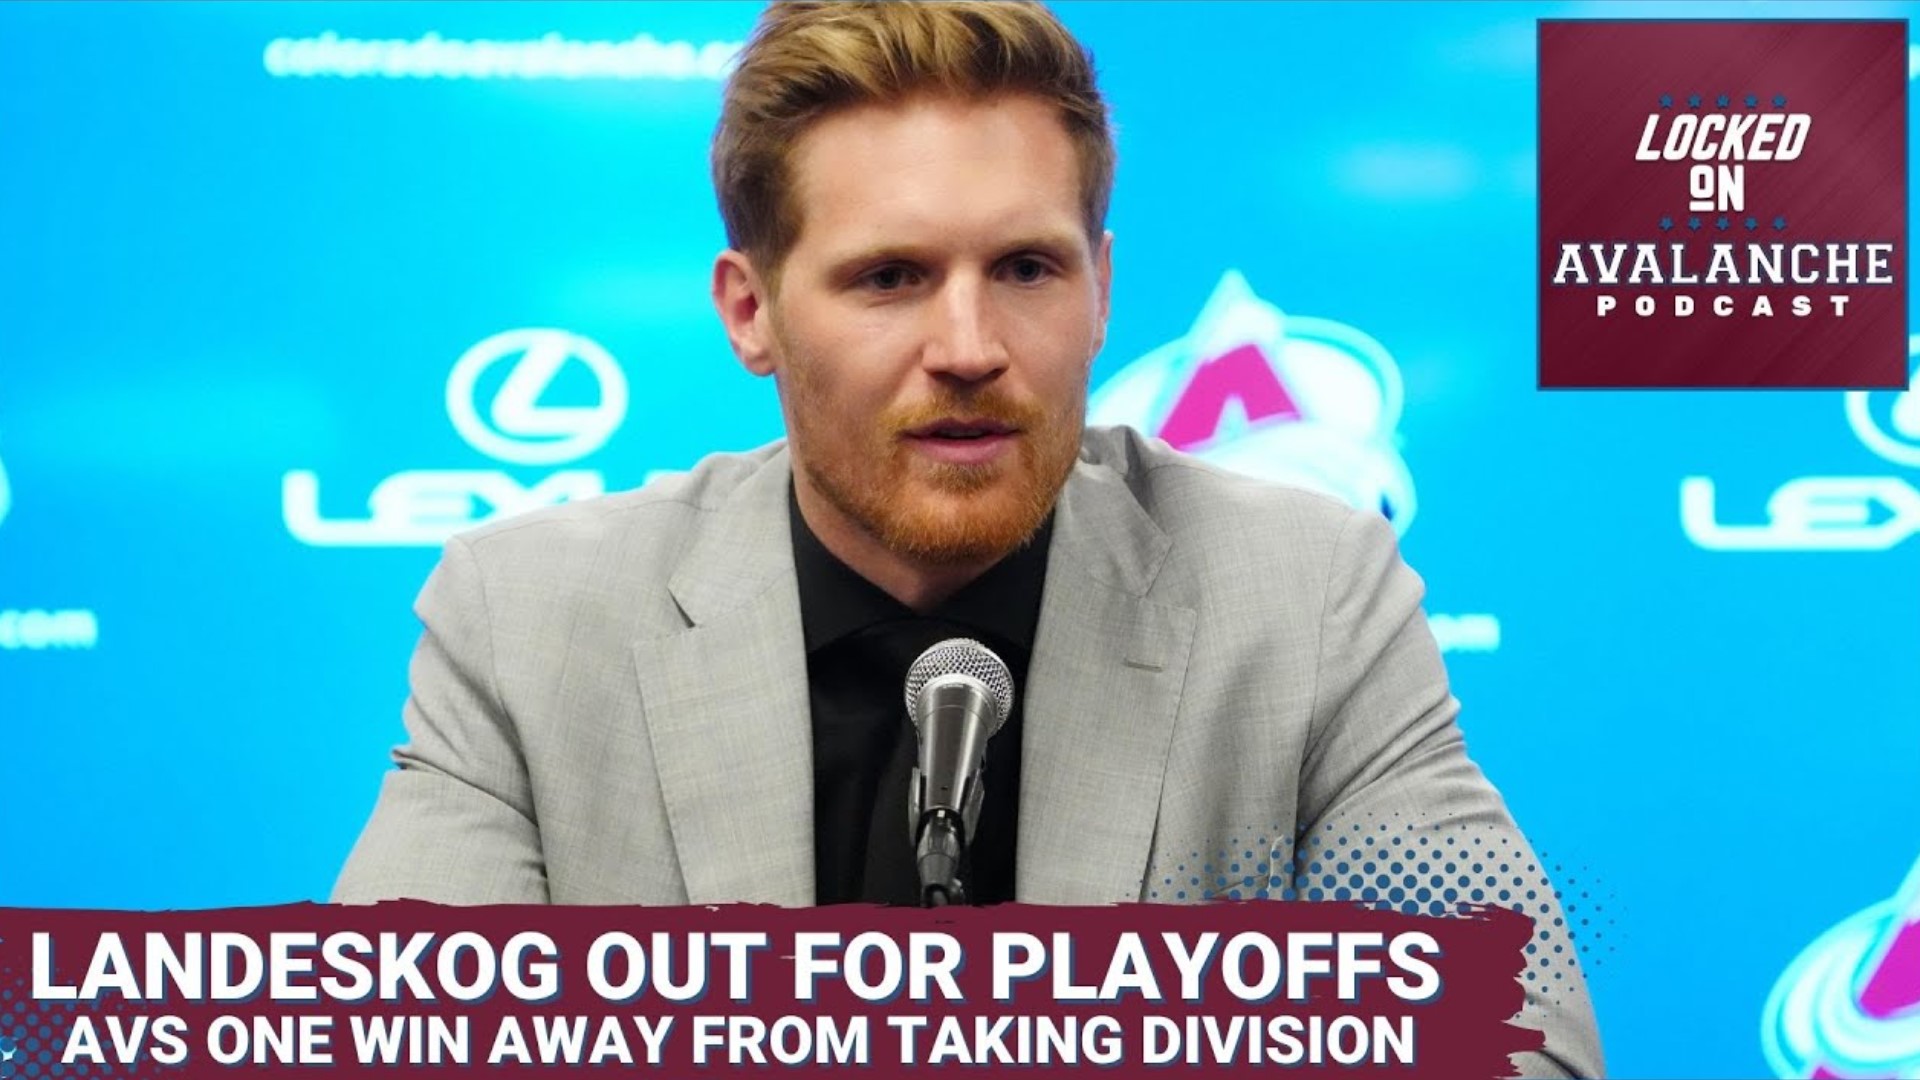 Can Colorado Avalanche win Stanley Cup again without Gabe Landeskog?